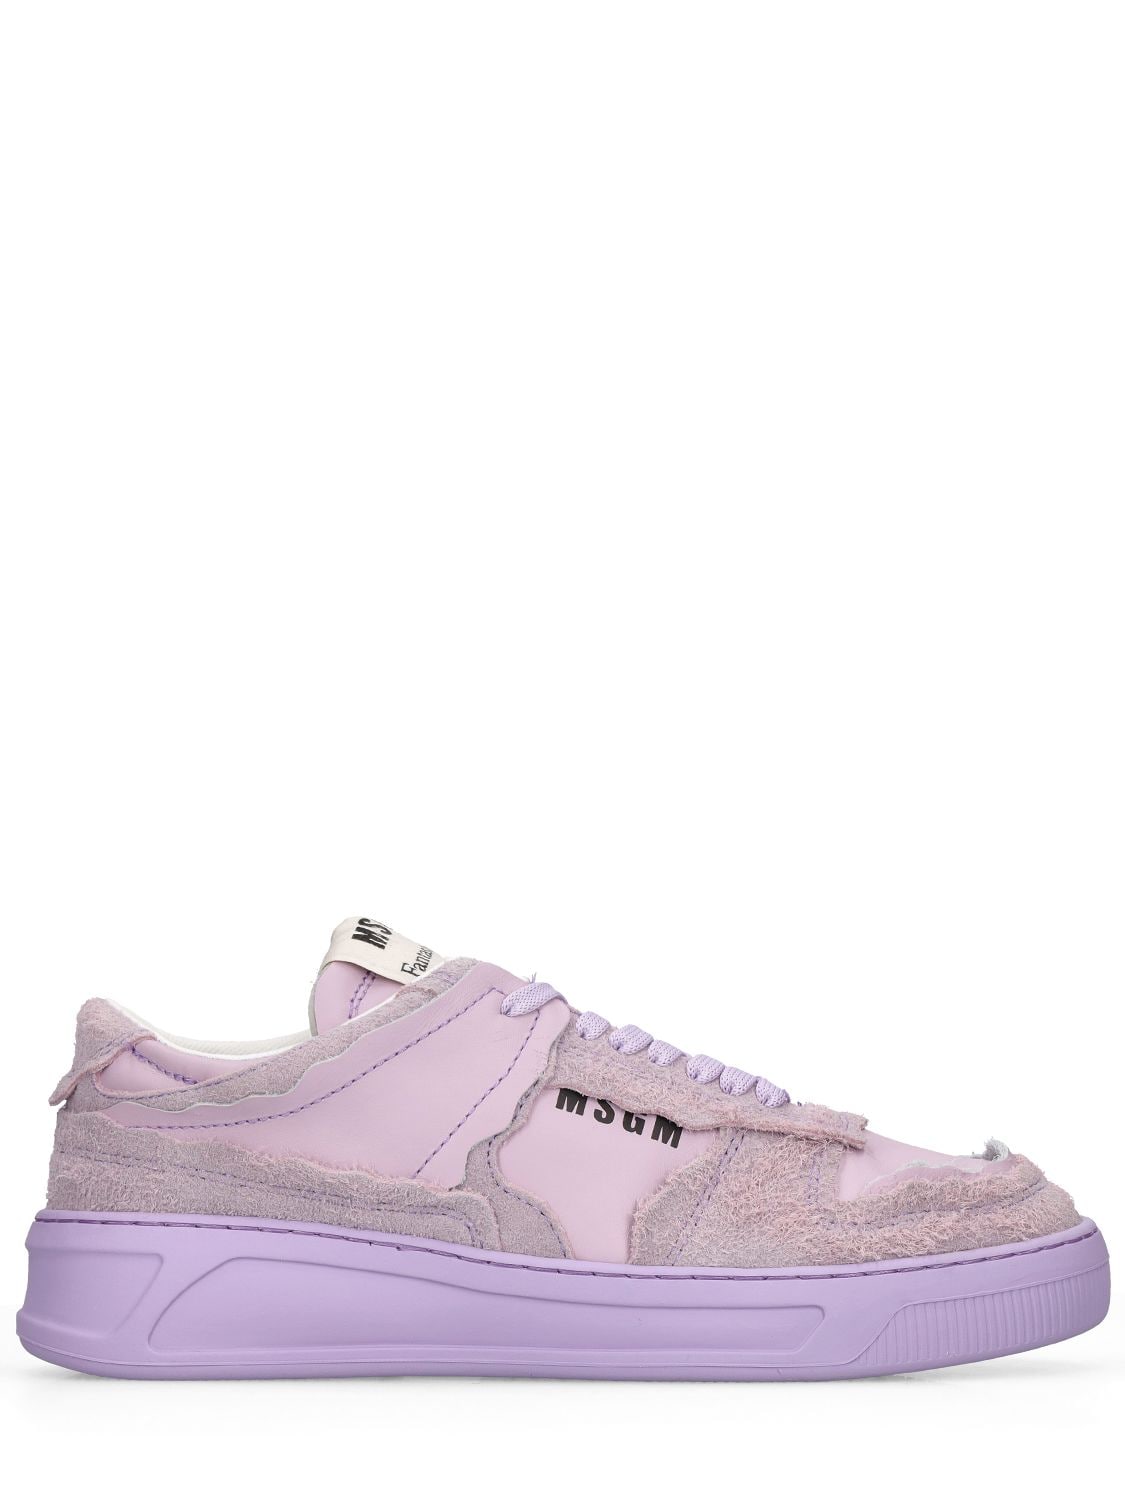 Msgm Low Top Suede Sneakers In Purple